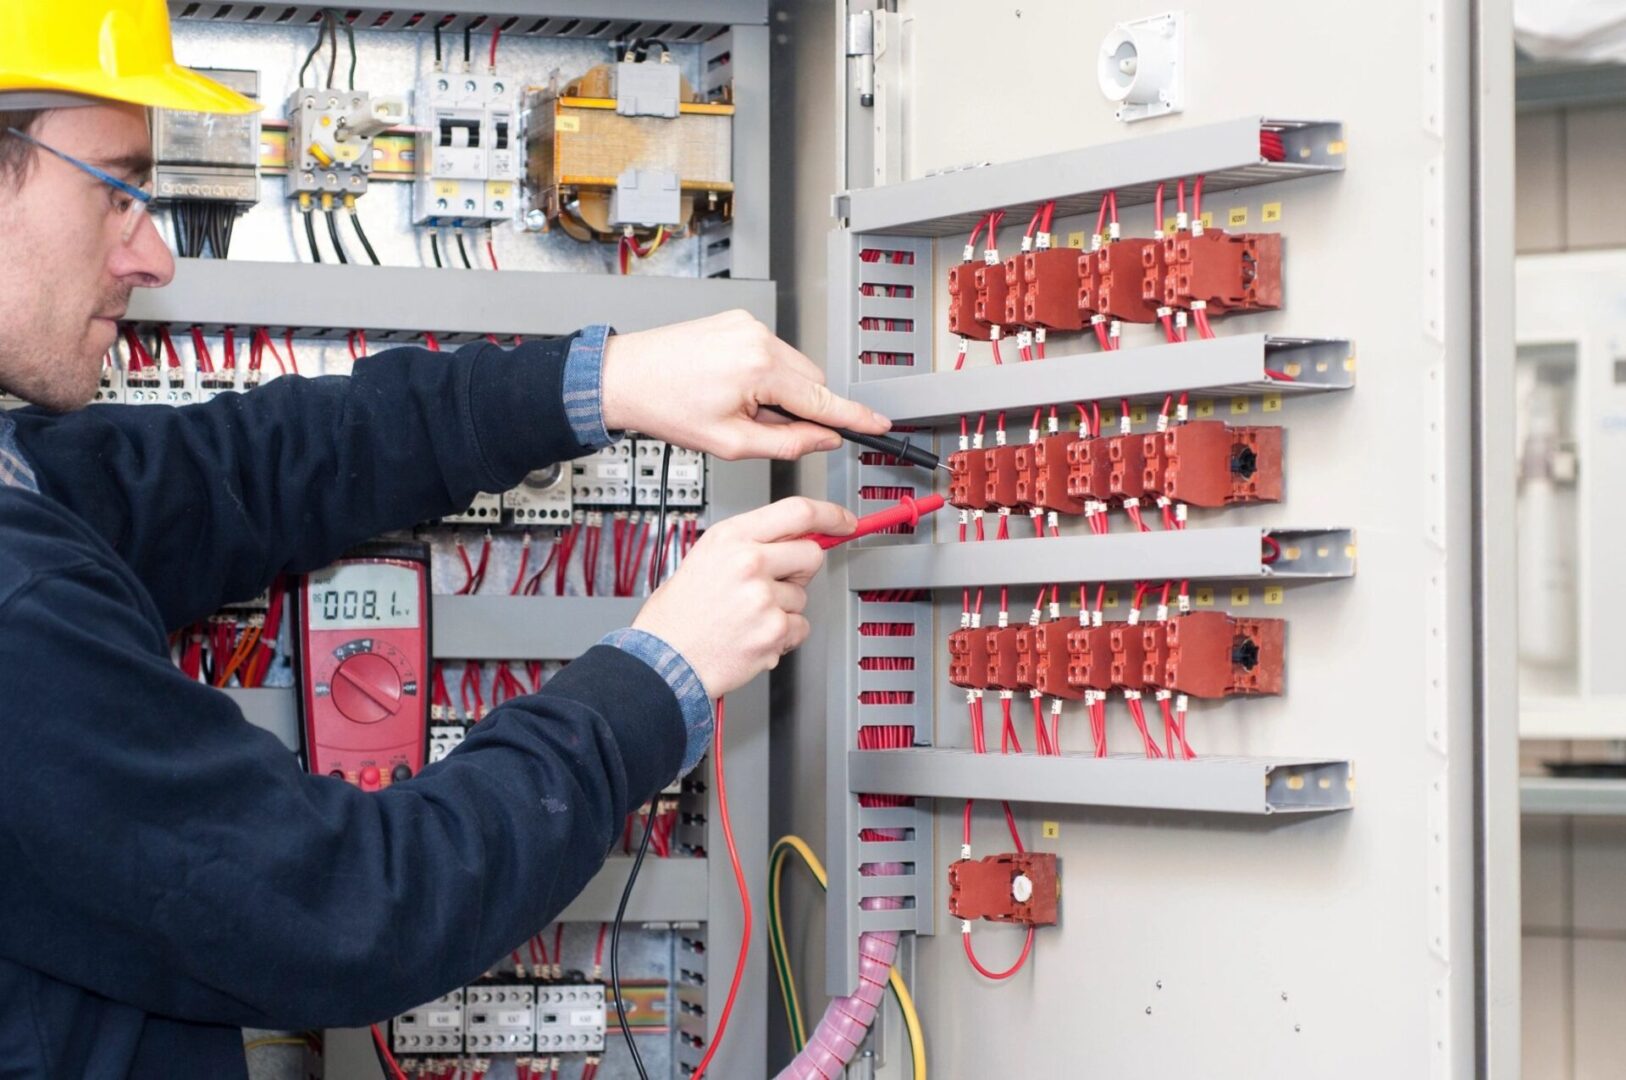 A person is working on an electrical panel.